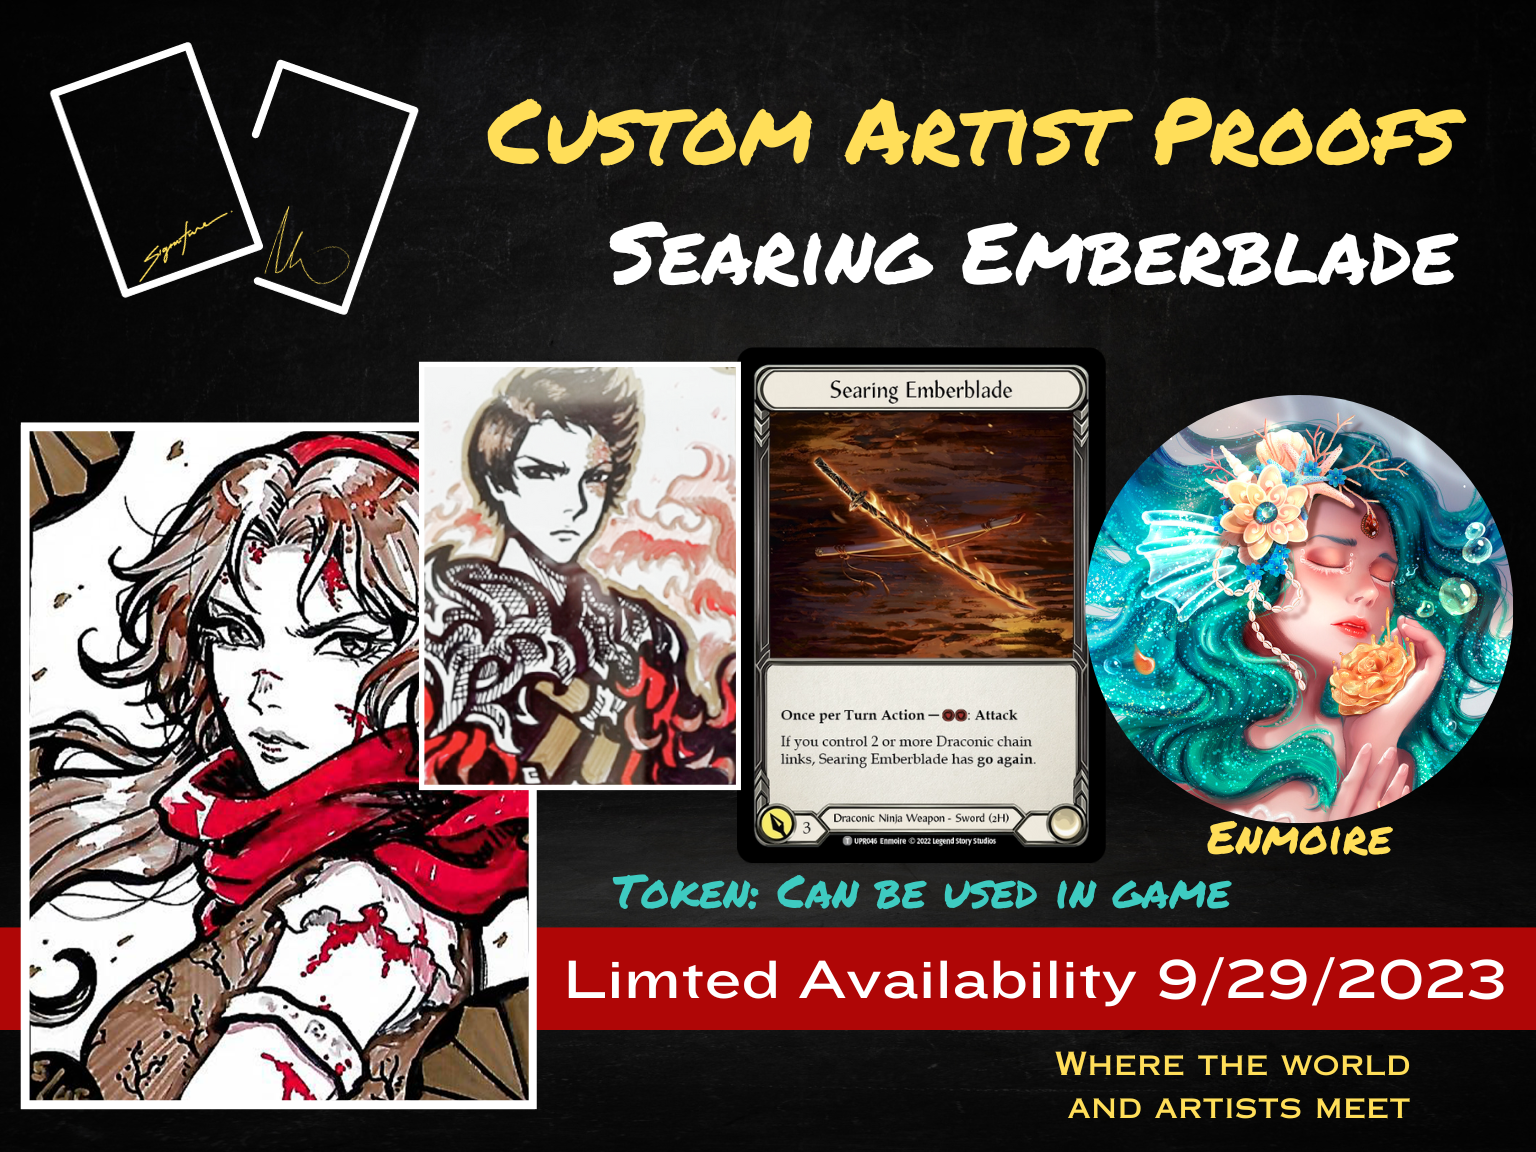 Custom Artist Proof - Searing Emberblade (Token for in Game Use)